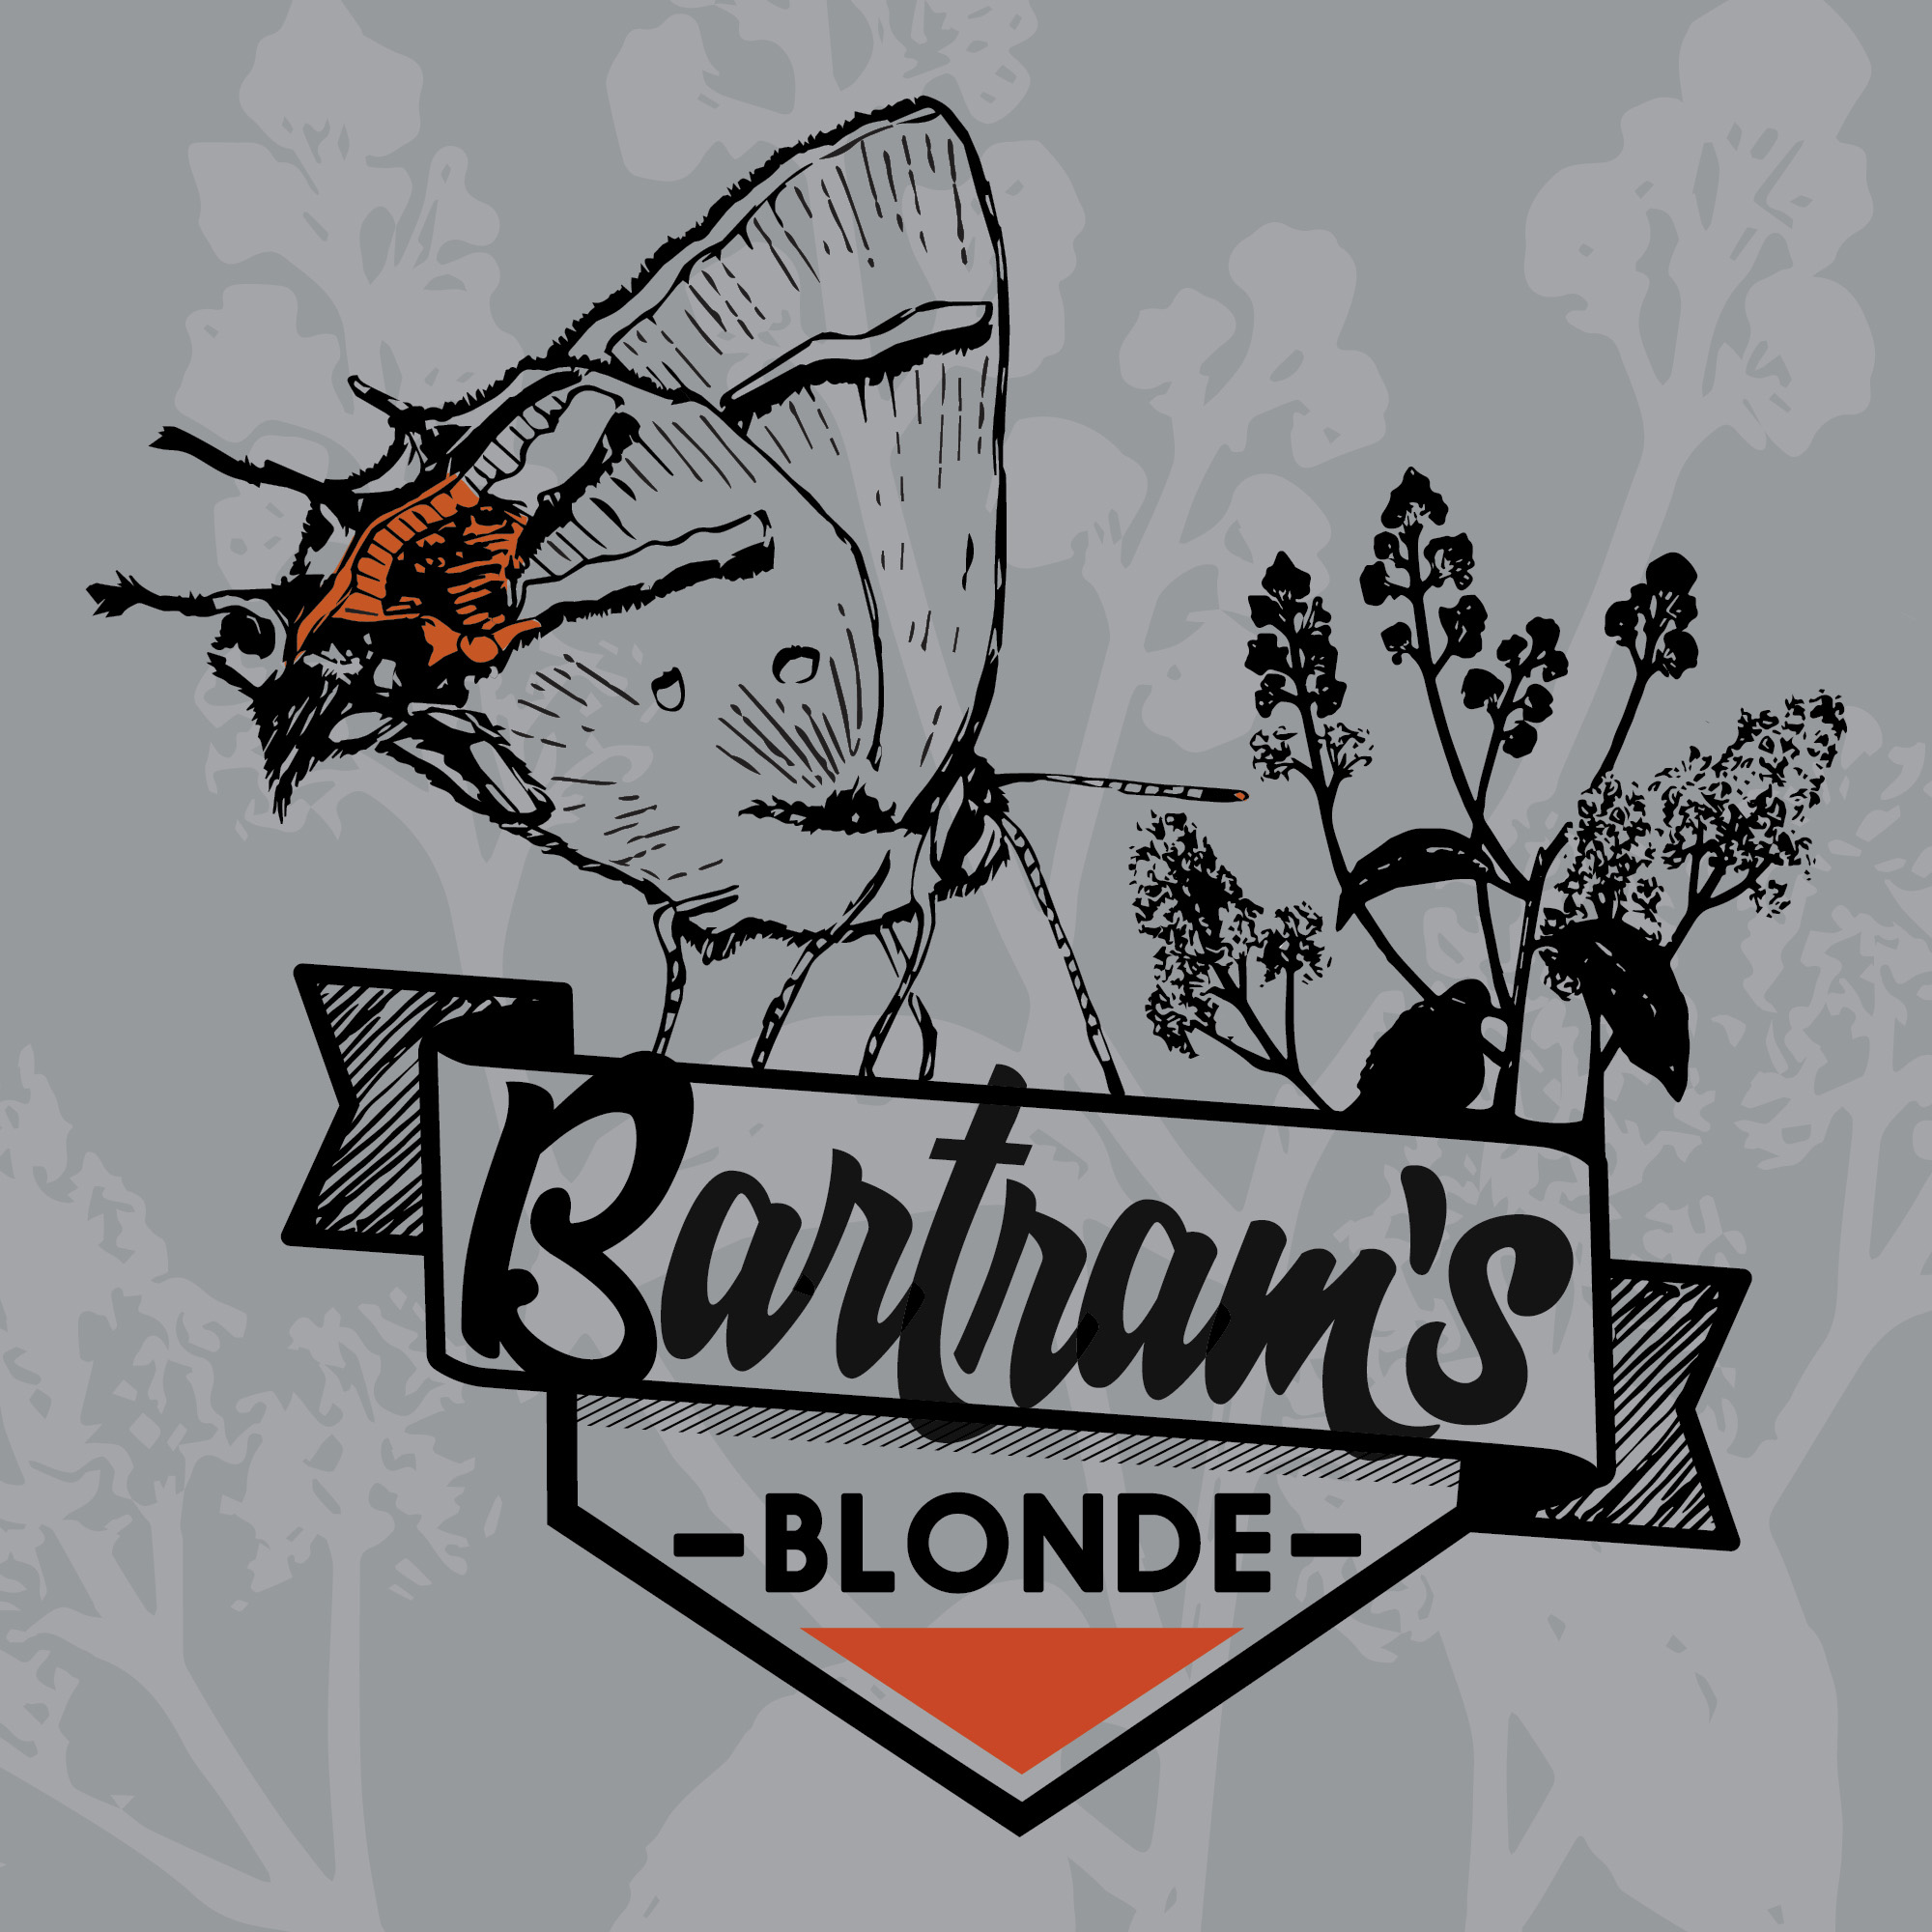 Bartram's Blond logo - black and orange line drawing of the Bartram's butterfly set against a grey background.